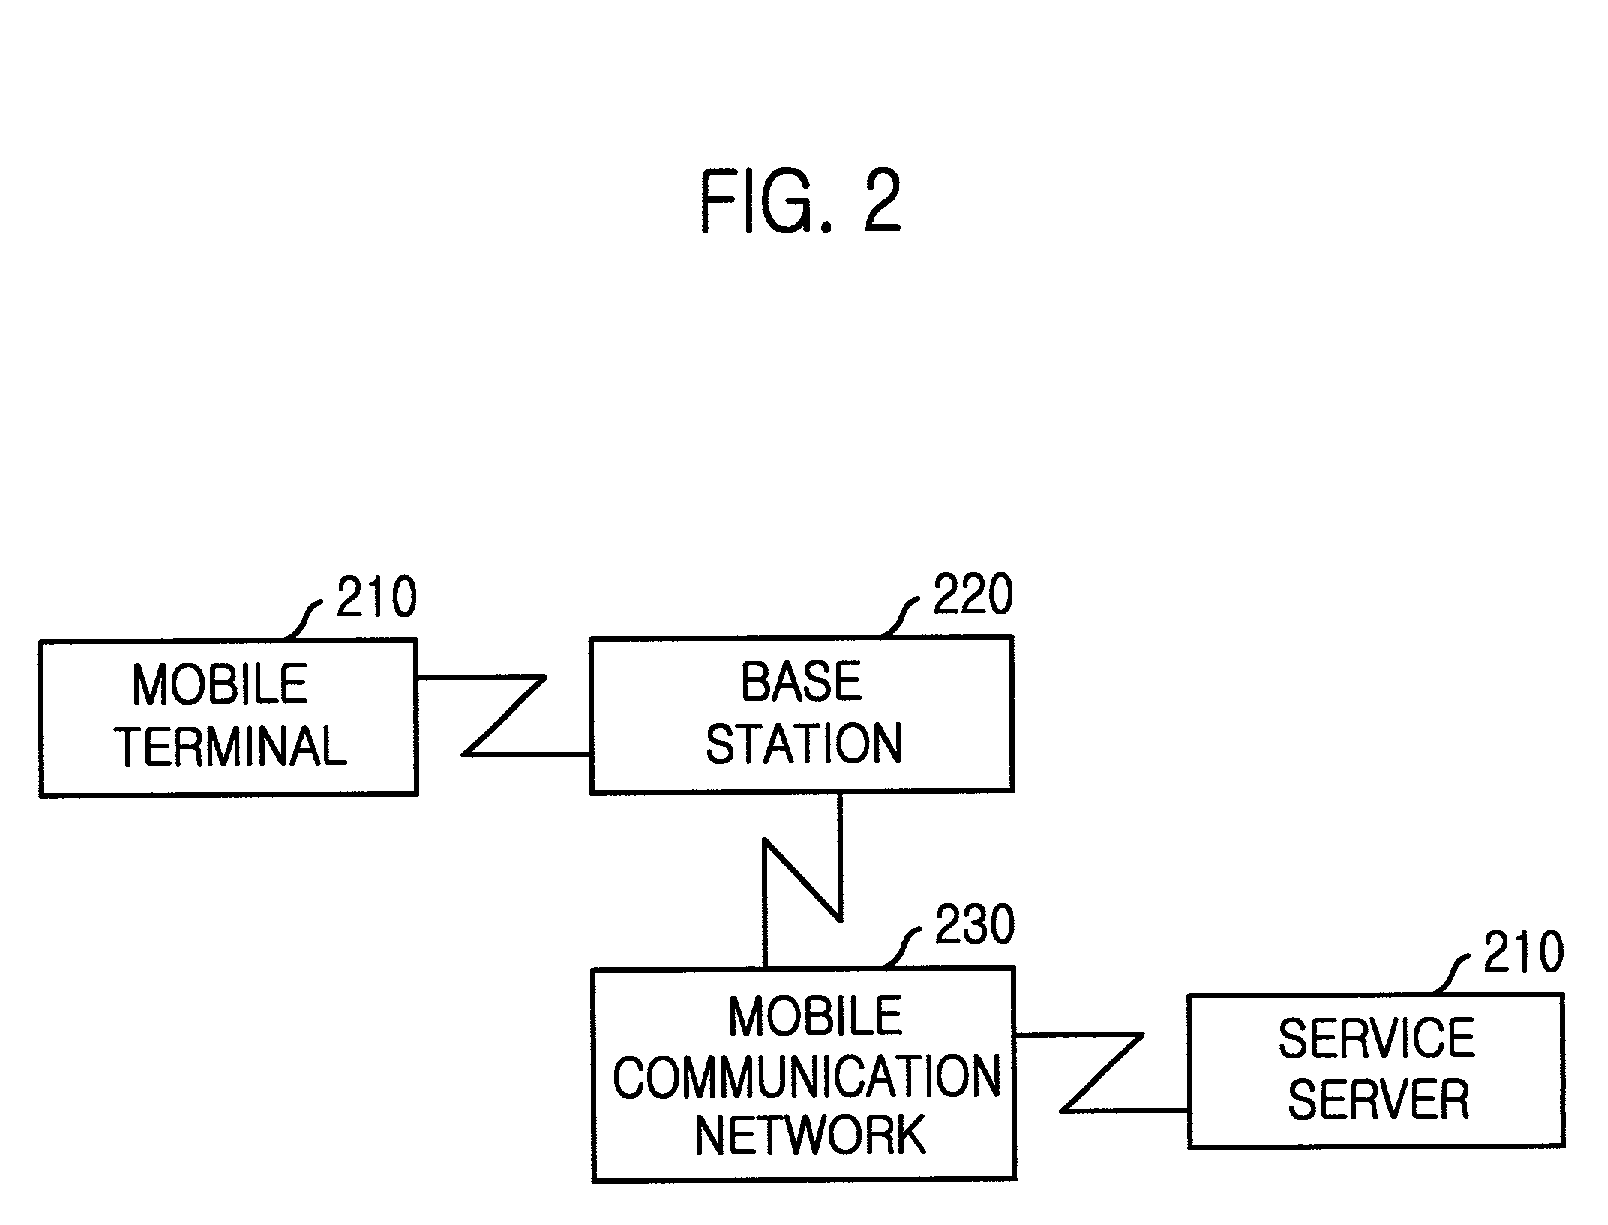 Method for providing mobile terminal with software keyboard suitable for language used in country where it is located